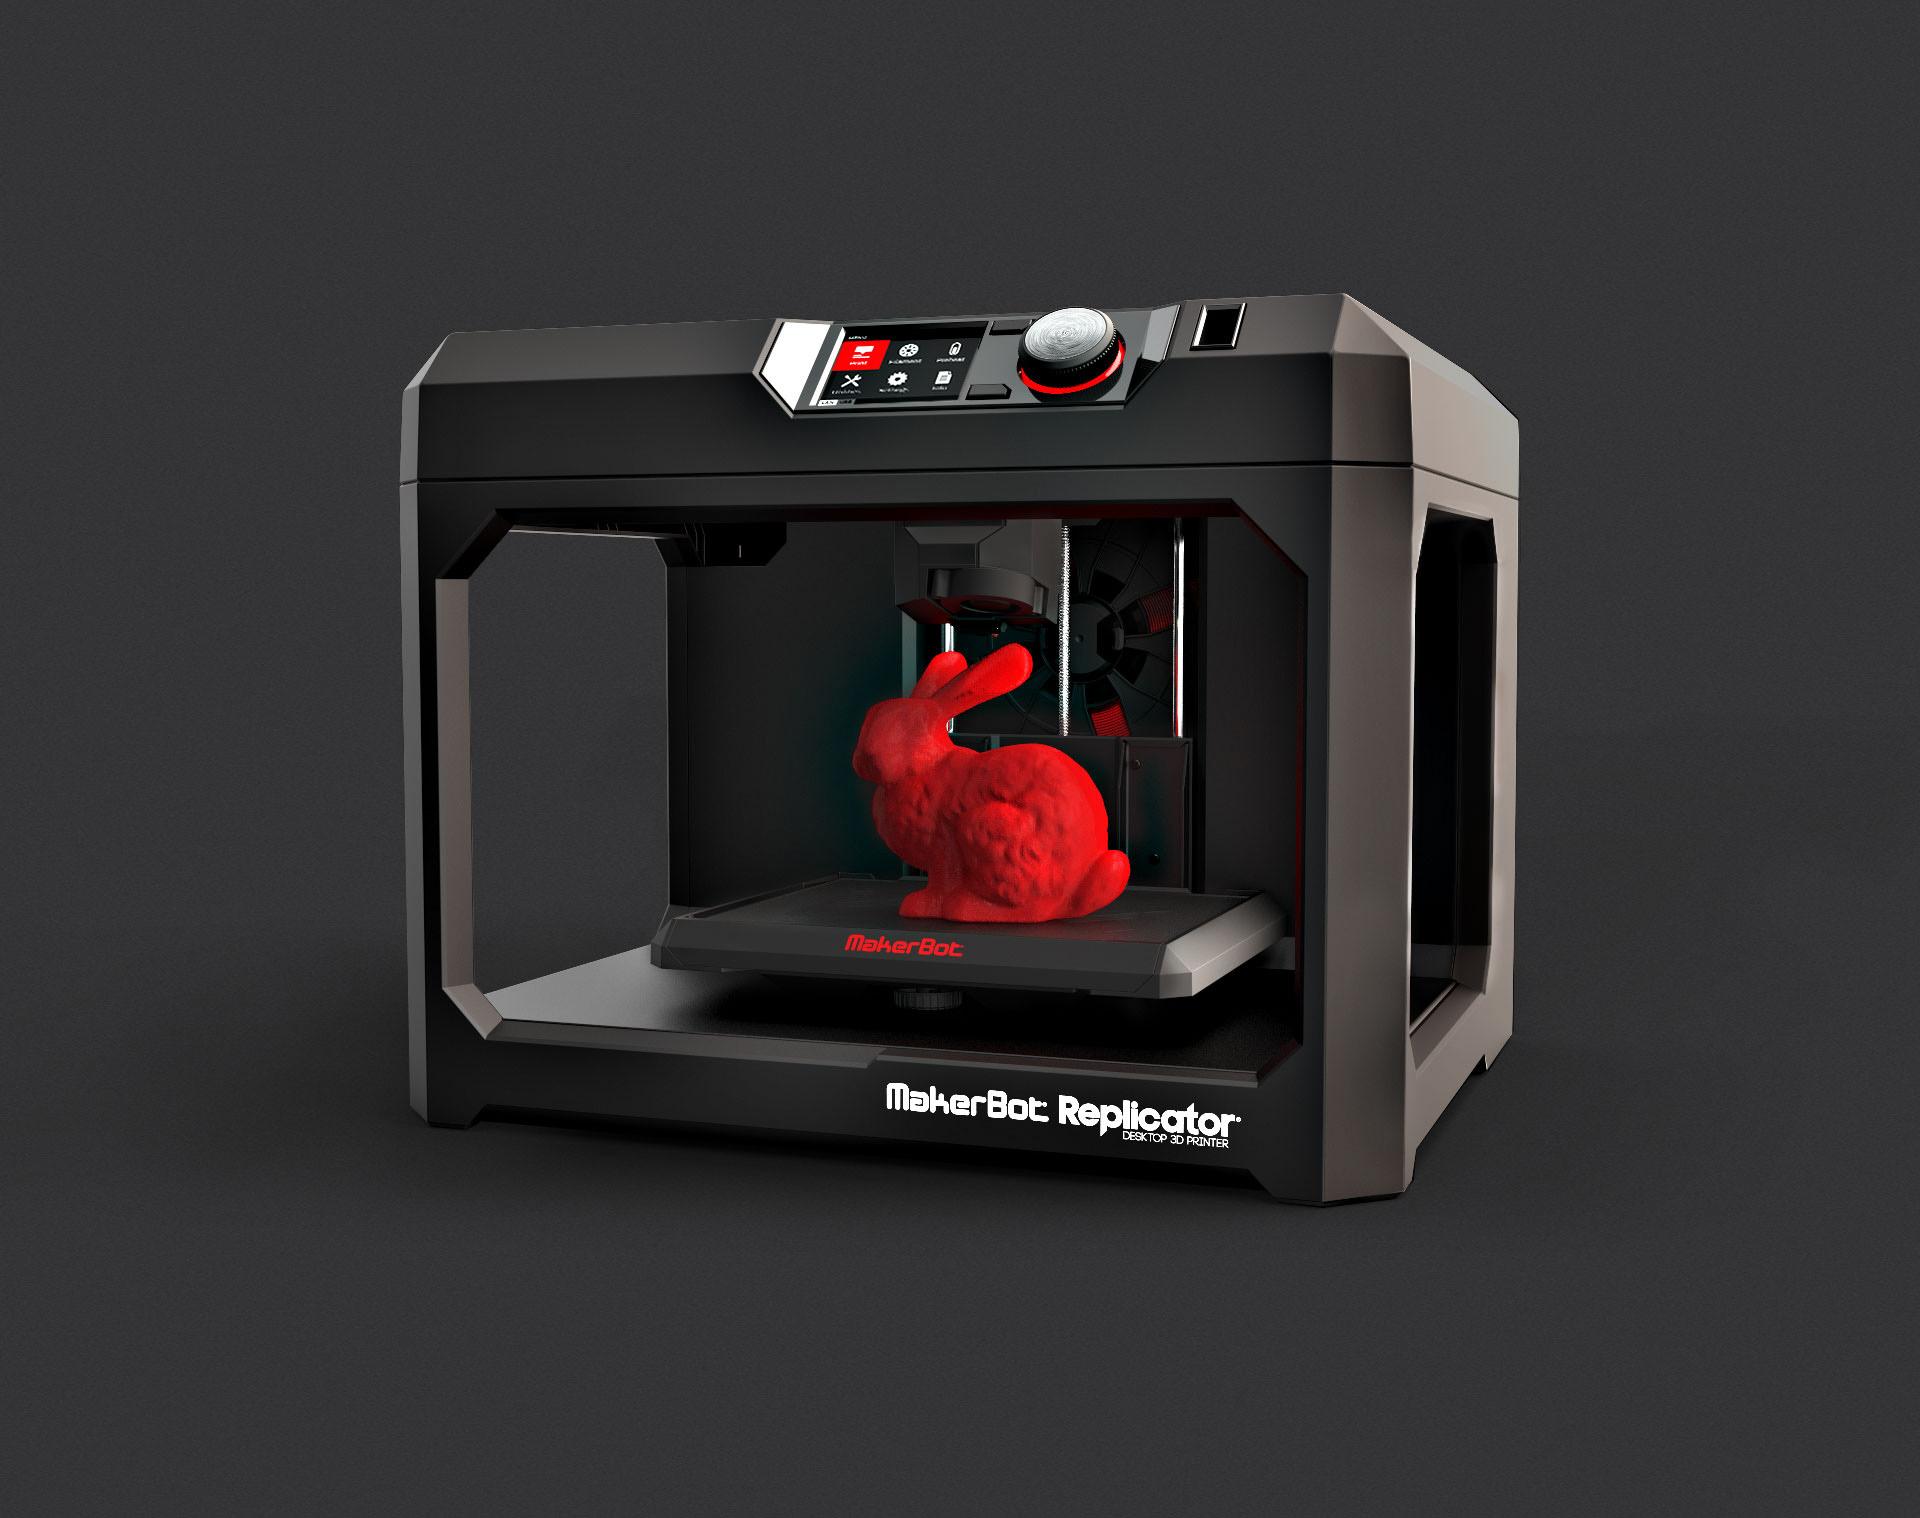 Makerbot Products Coming to Central America, to be Sold at Makerz in